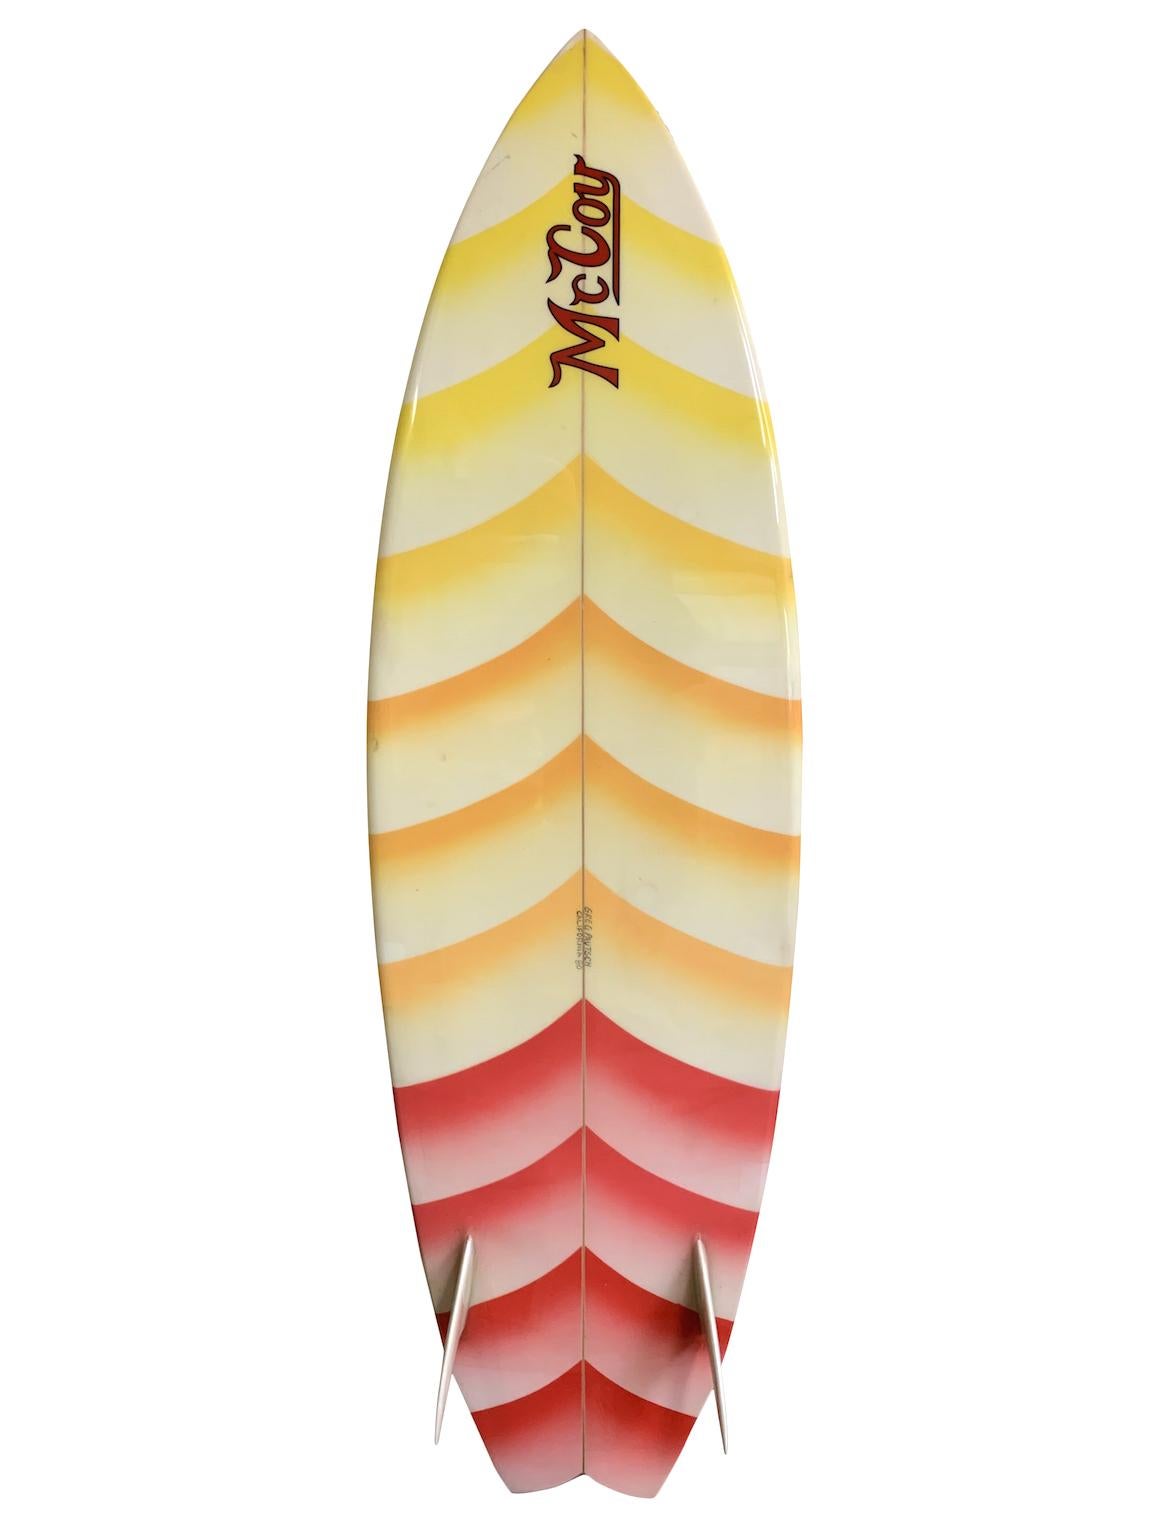 1980 McCoy twin fin surfboard shaped by Greg Pautsch. Featuring a beautiful airbrush fade design with glass on twin fins. Restored to original condition by a surfboard restoration expert with over 40 years of experience.

Geoff McCoy is a legendary